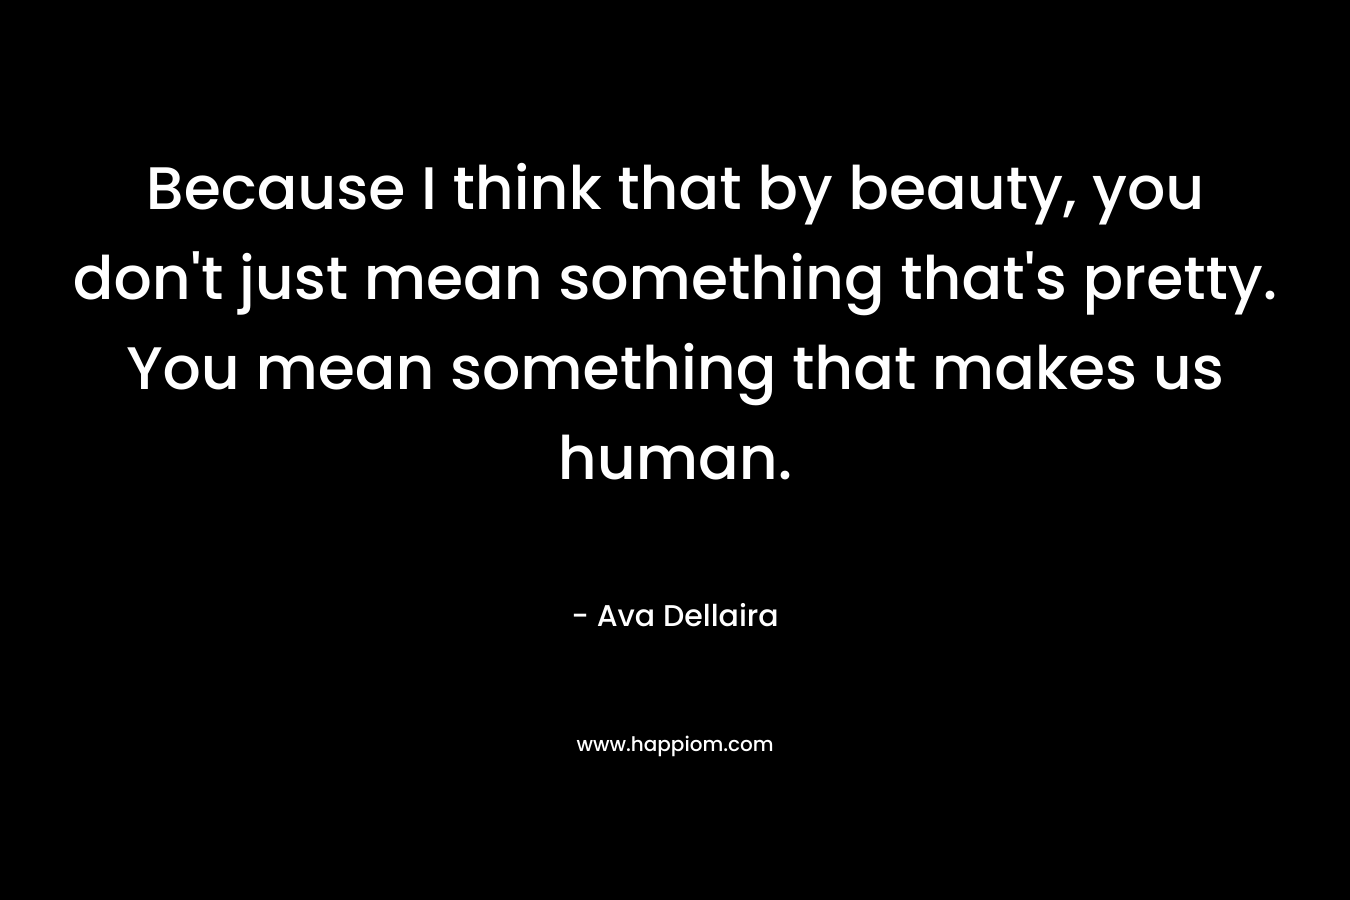 Because I think that by beauty, you don’t just mean something that’s pretty. You mean something that makes us human. – Ava Dellaira